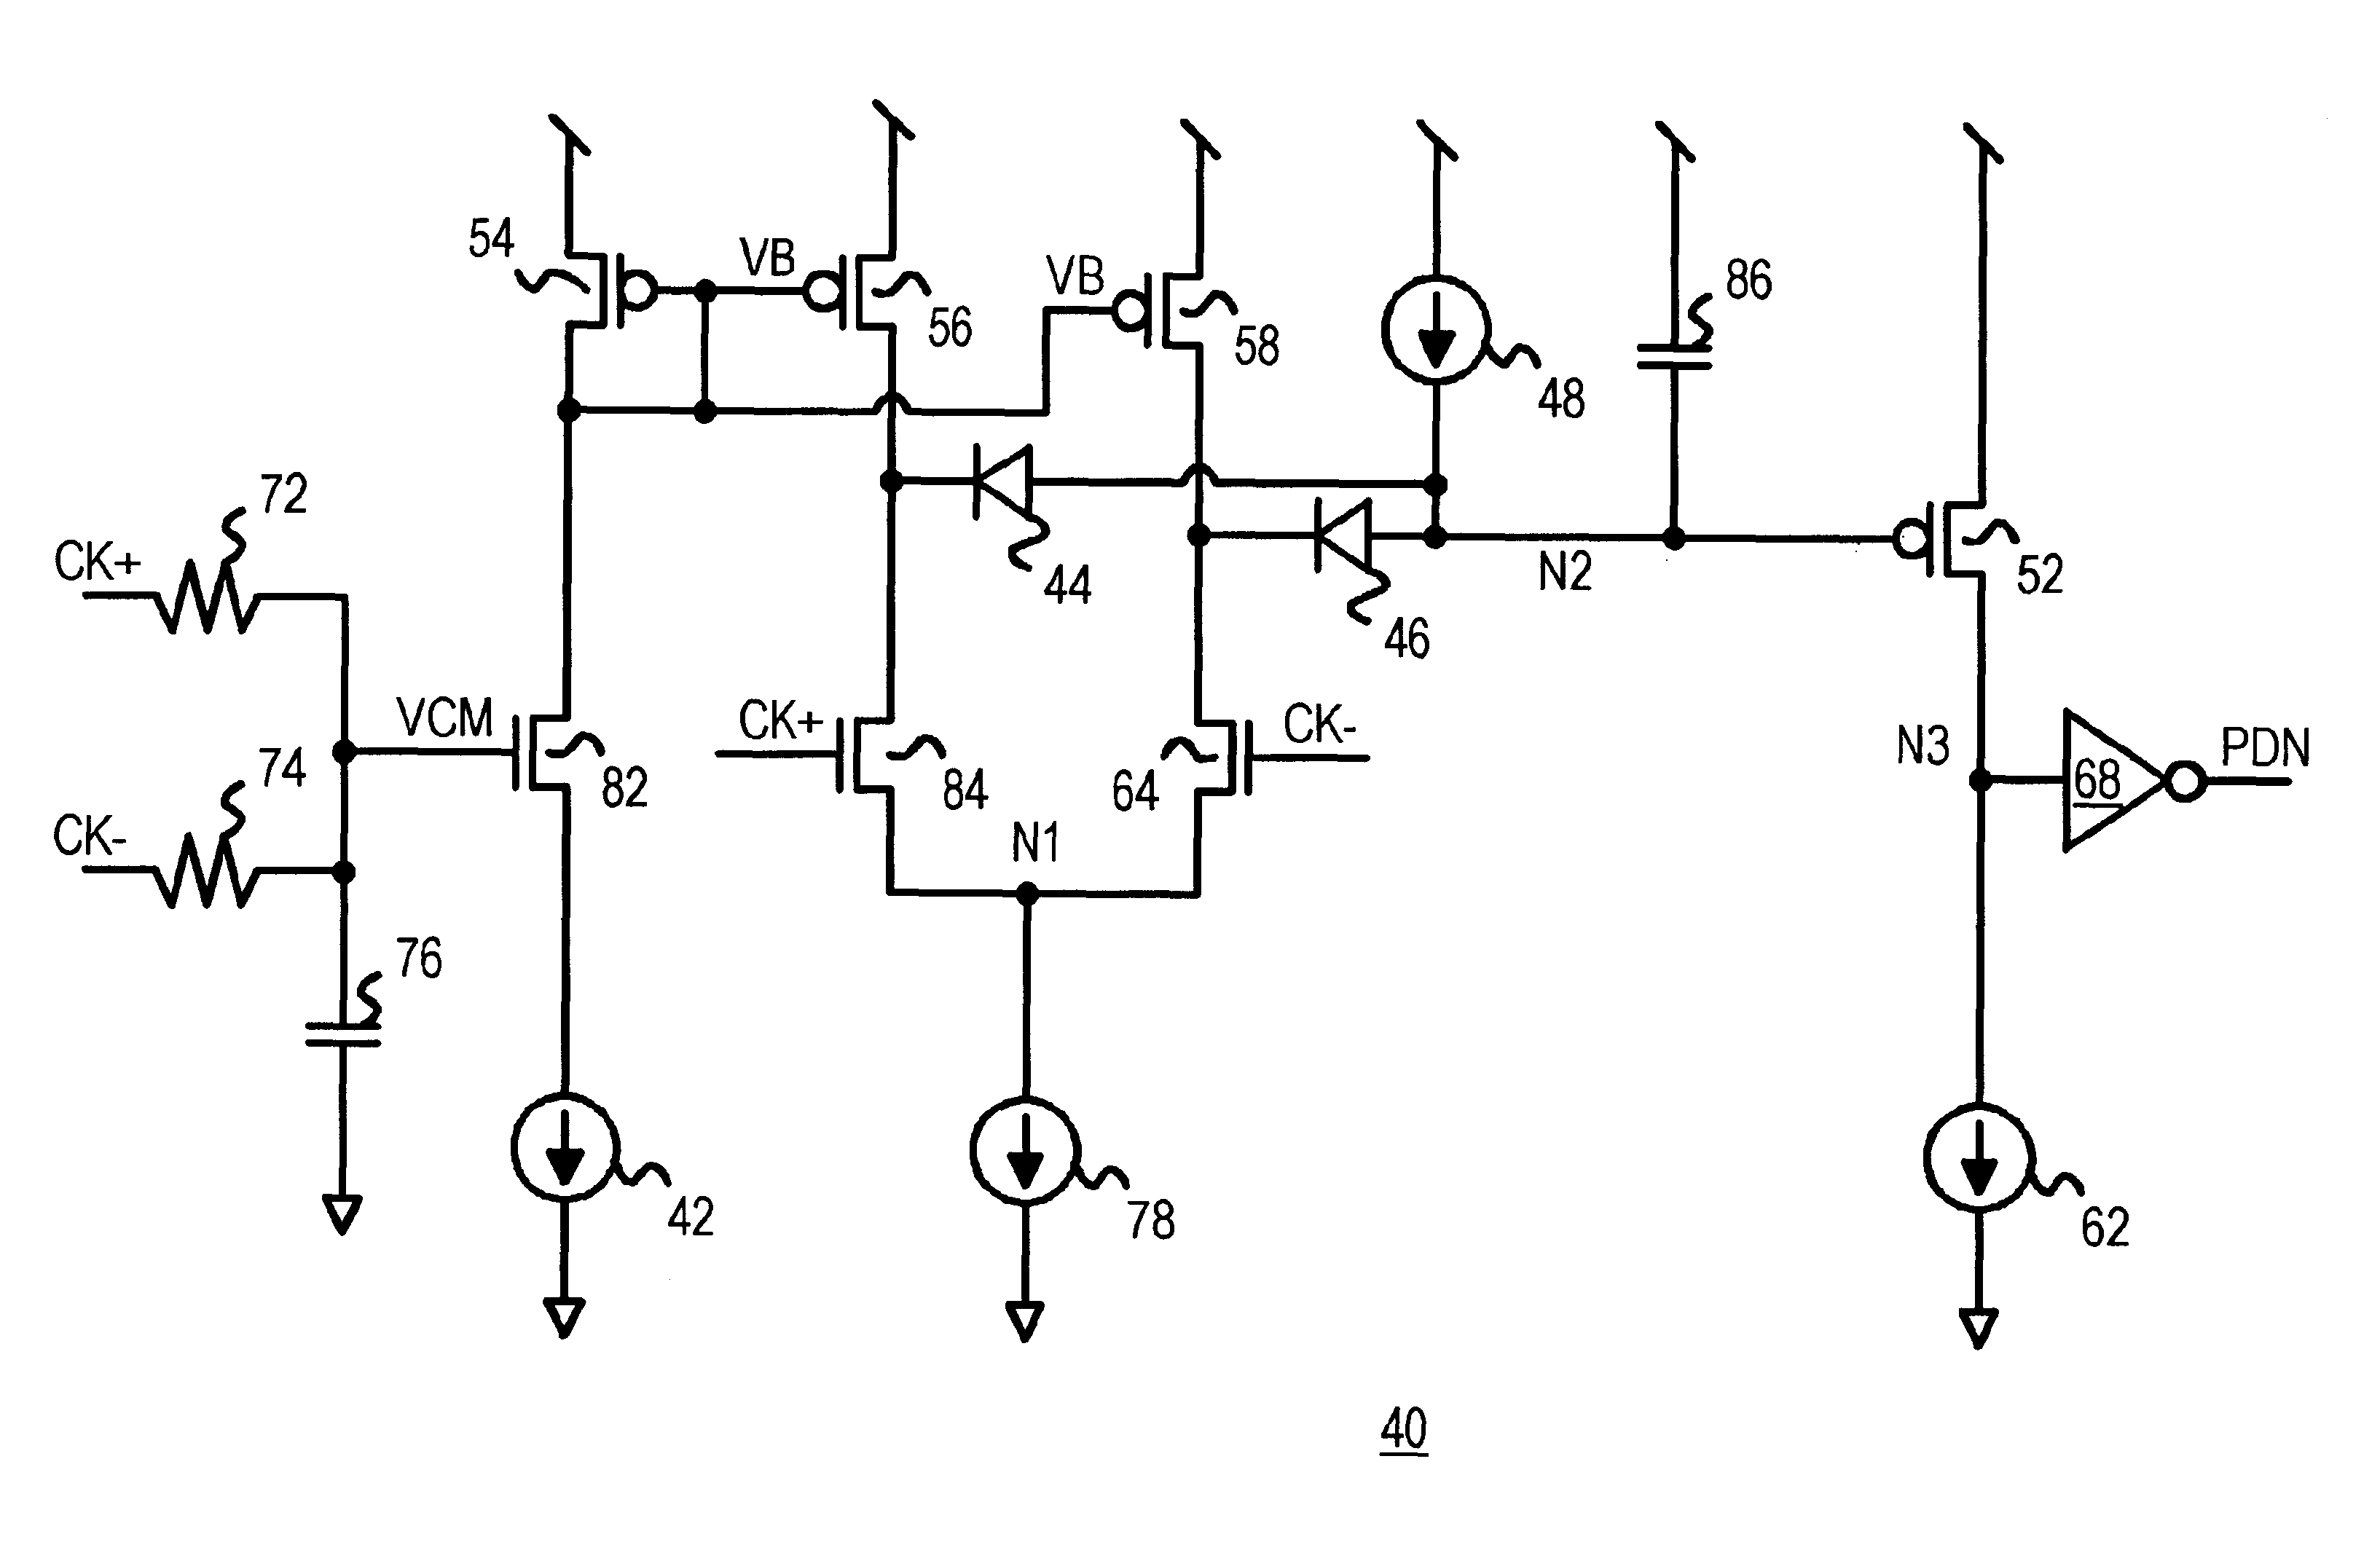 Clock presence detector comparing differential clock to common-mode voltage